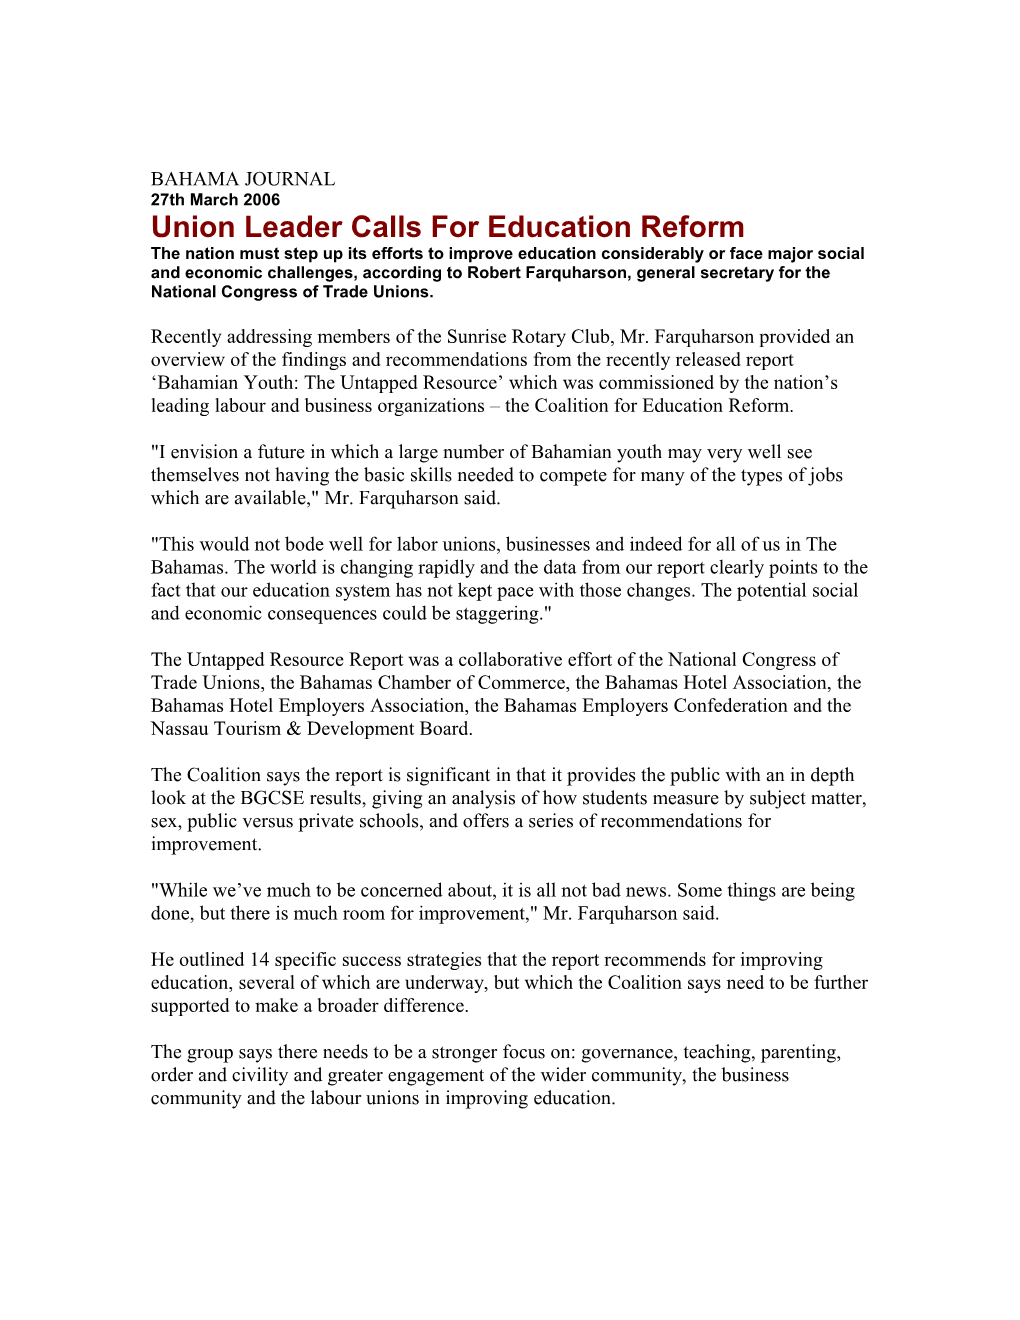 Union Leader Calls for Education Reform